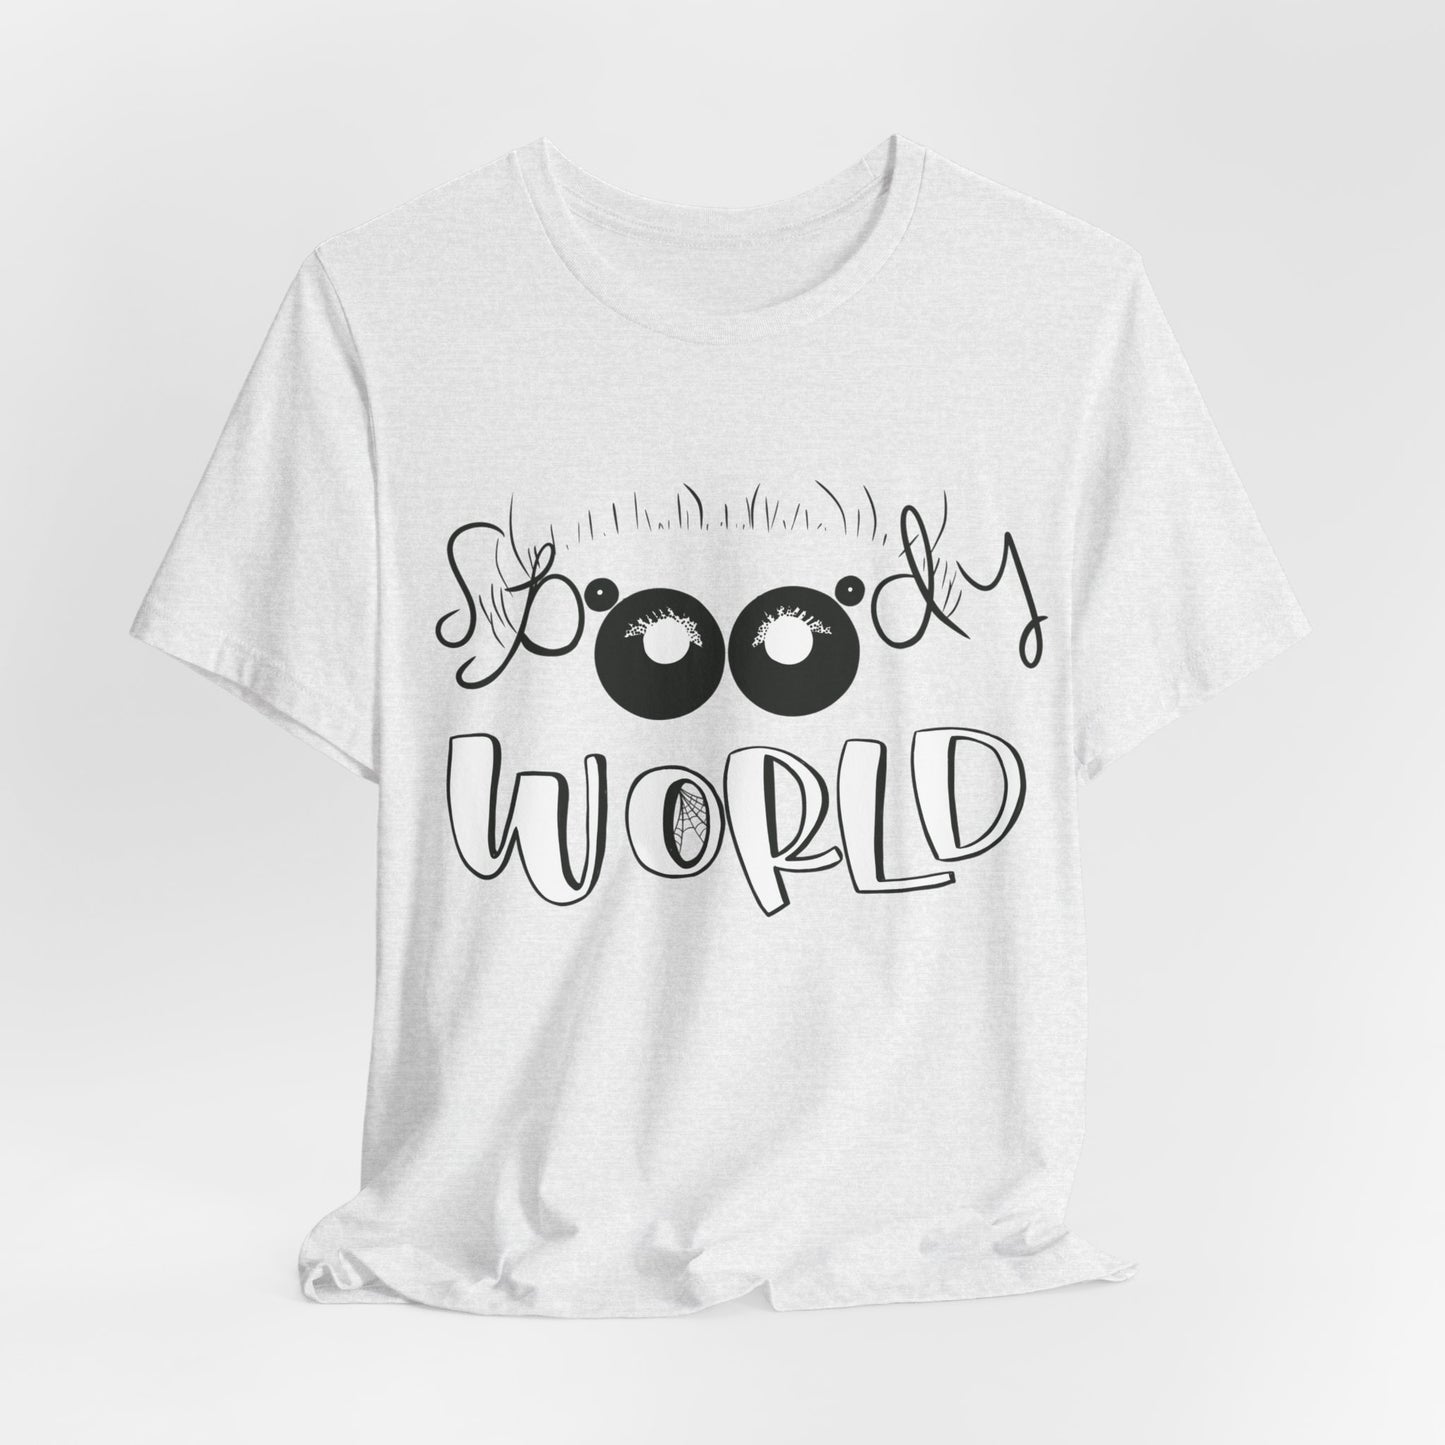 Spoody World Jumping Spider Tee